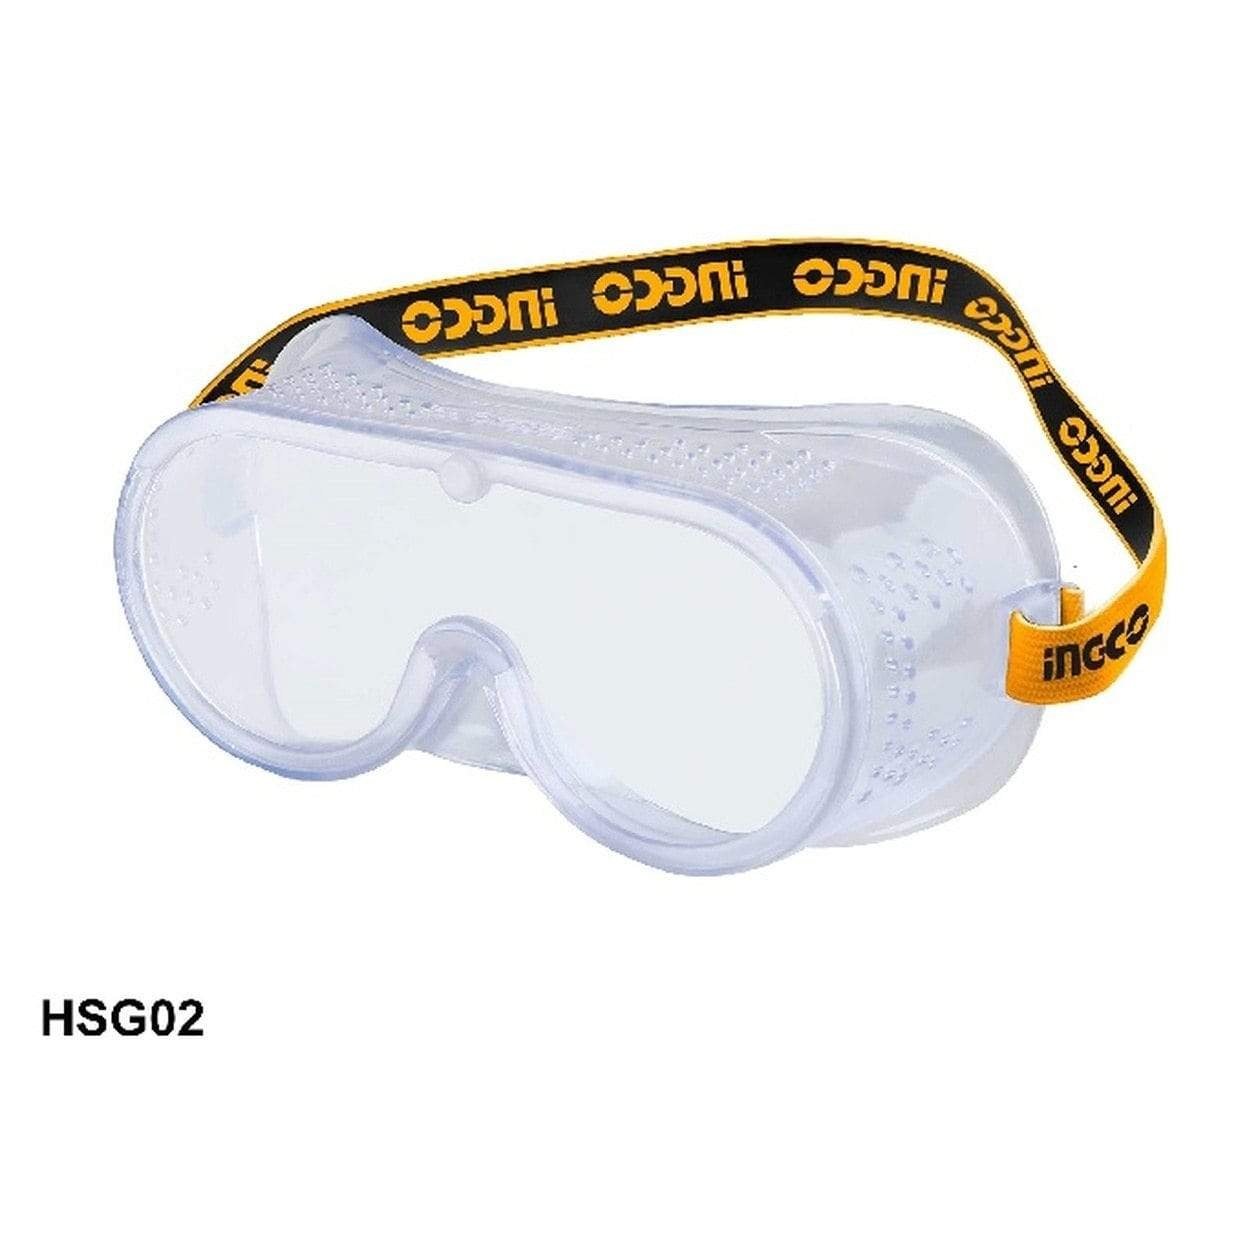 Ingco Safety Goggles - HSG02 | Supply Master | Accra, Ghana Tools Building Steel Engineering Hardware tool